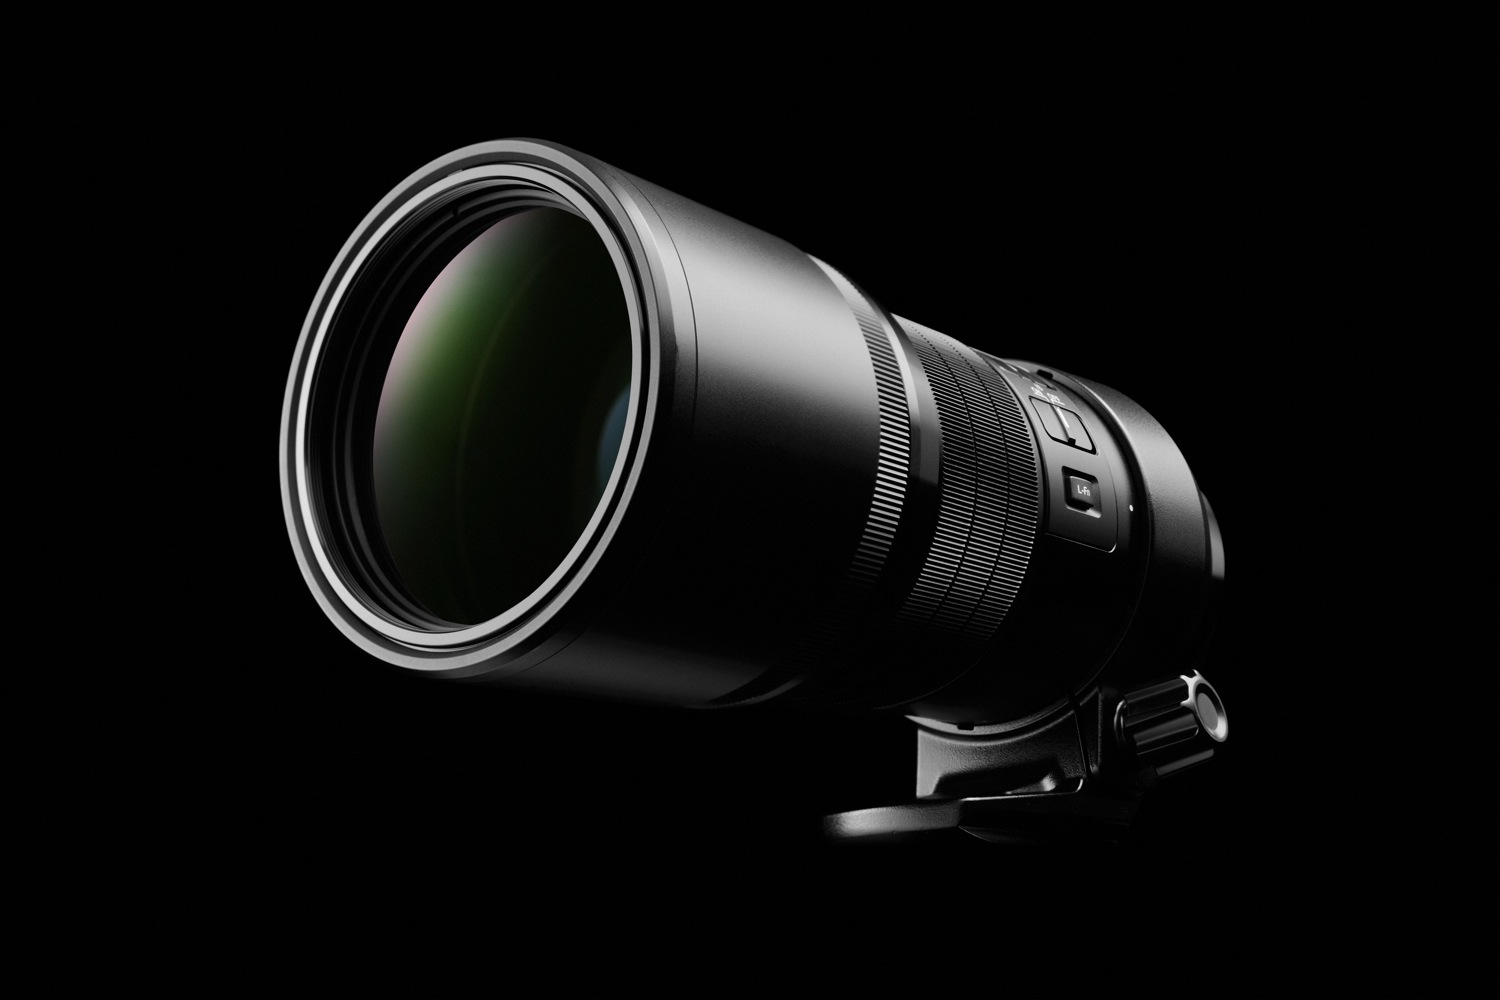 olympus 300mm lens puts extra stabilization into handheld photography ces2016 2